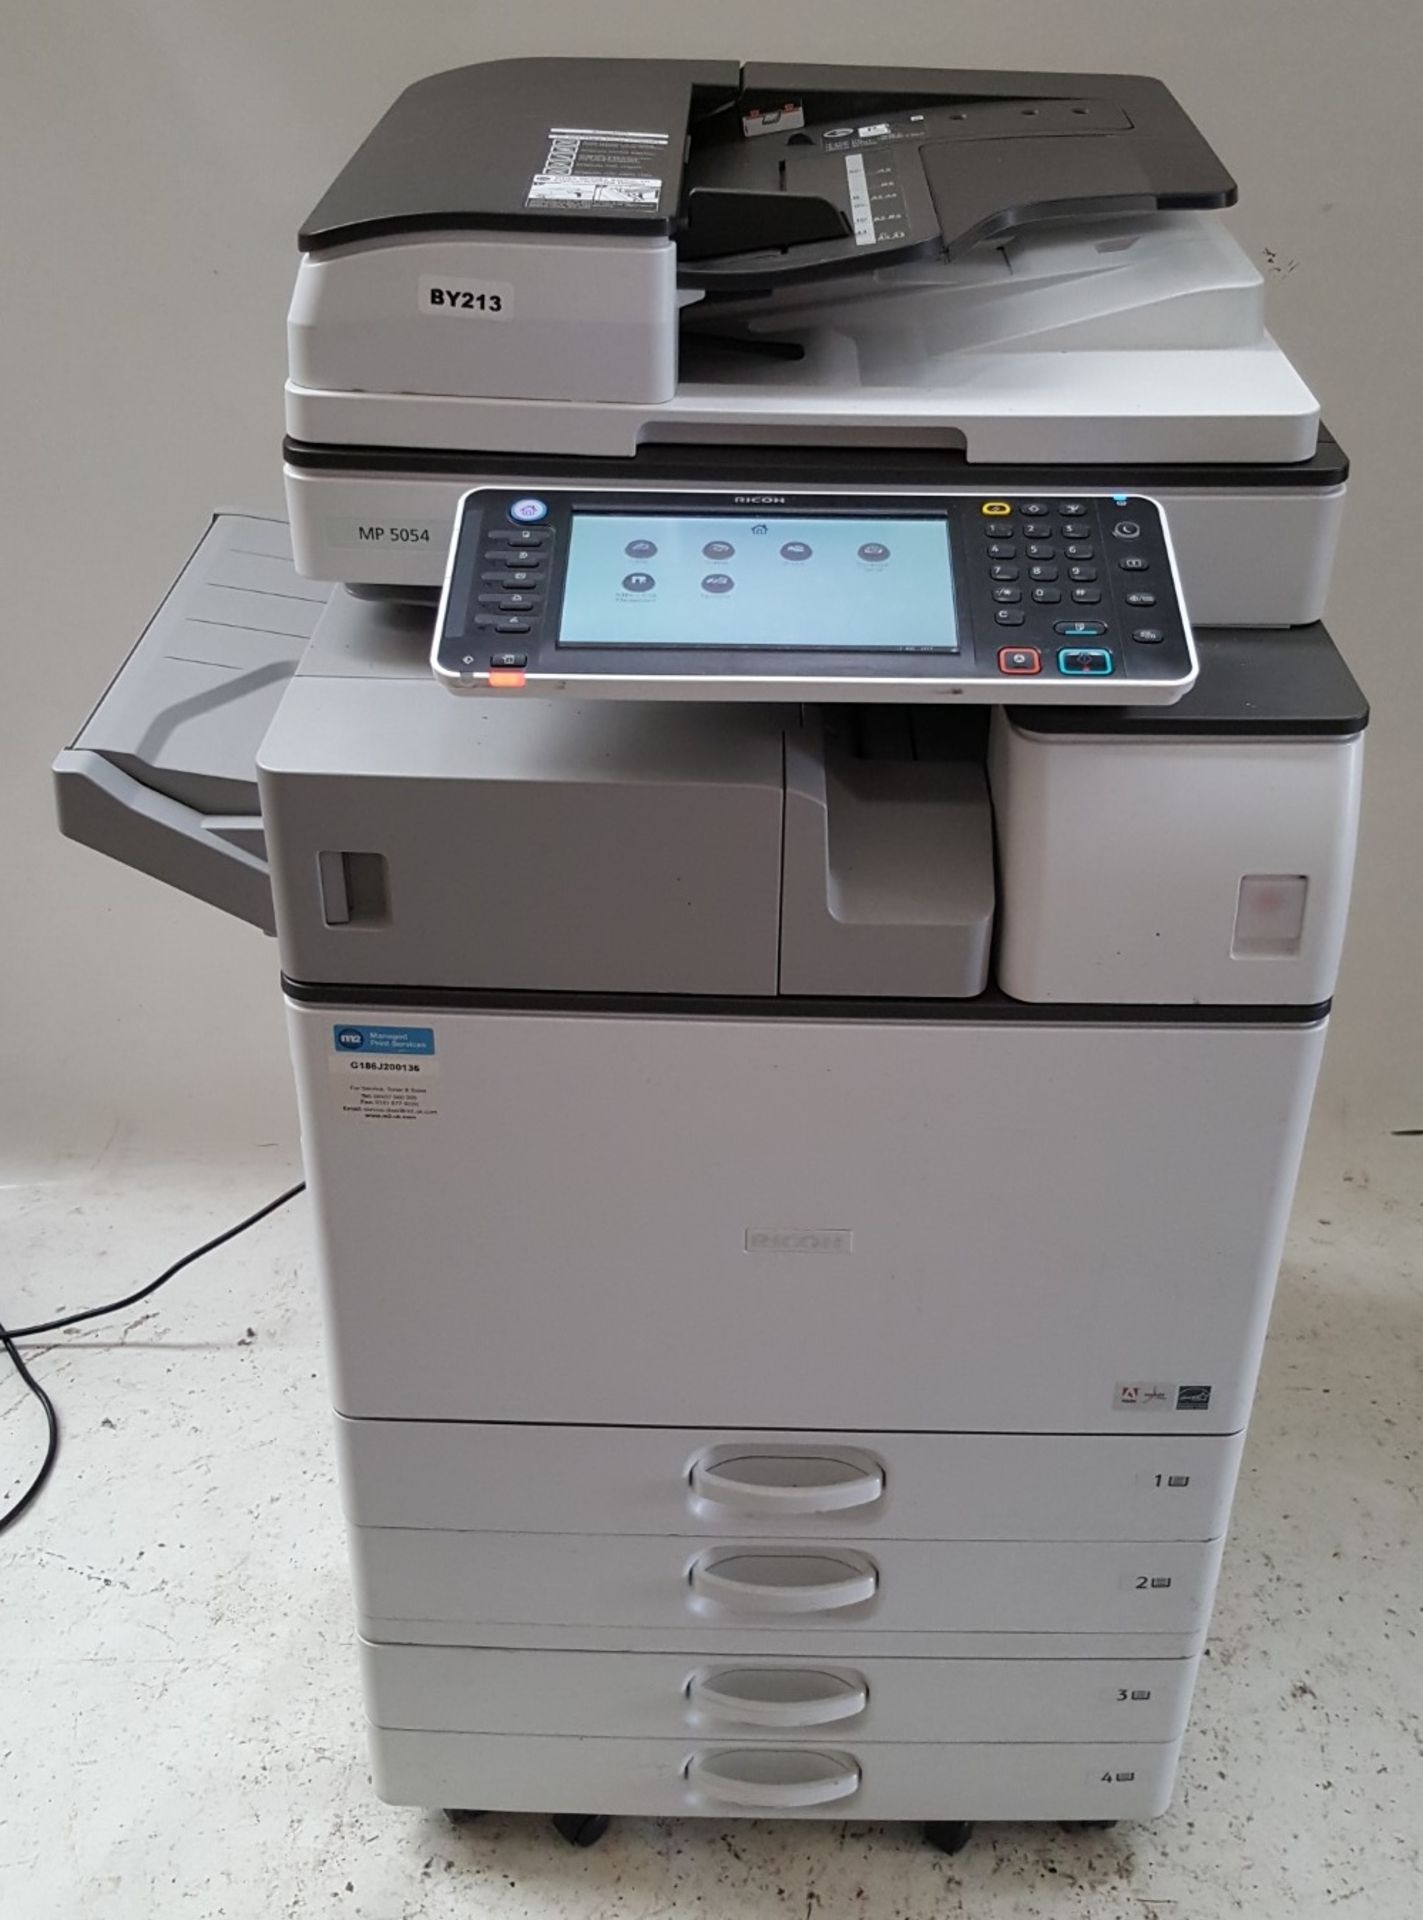 1 x RICOH MP 5054 Black and White Laser Multifunction Office Printer - Ref BY213 - Image 3 of 5